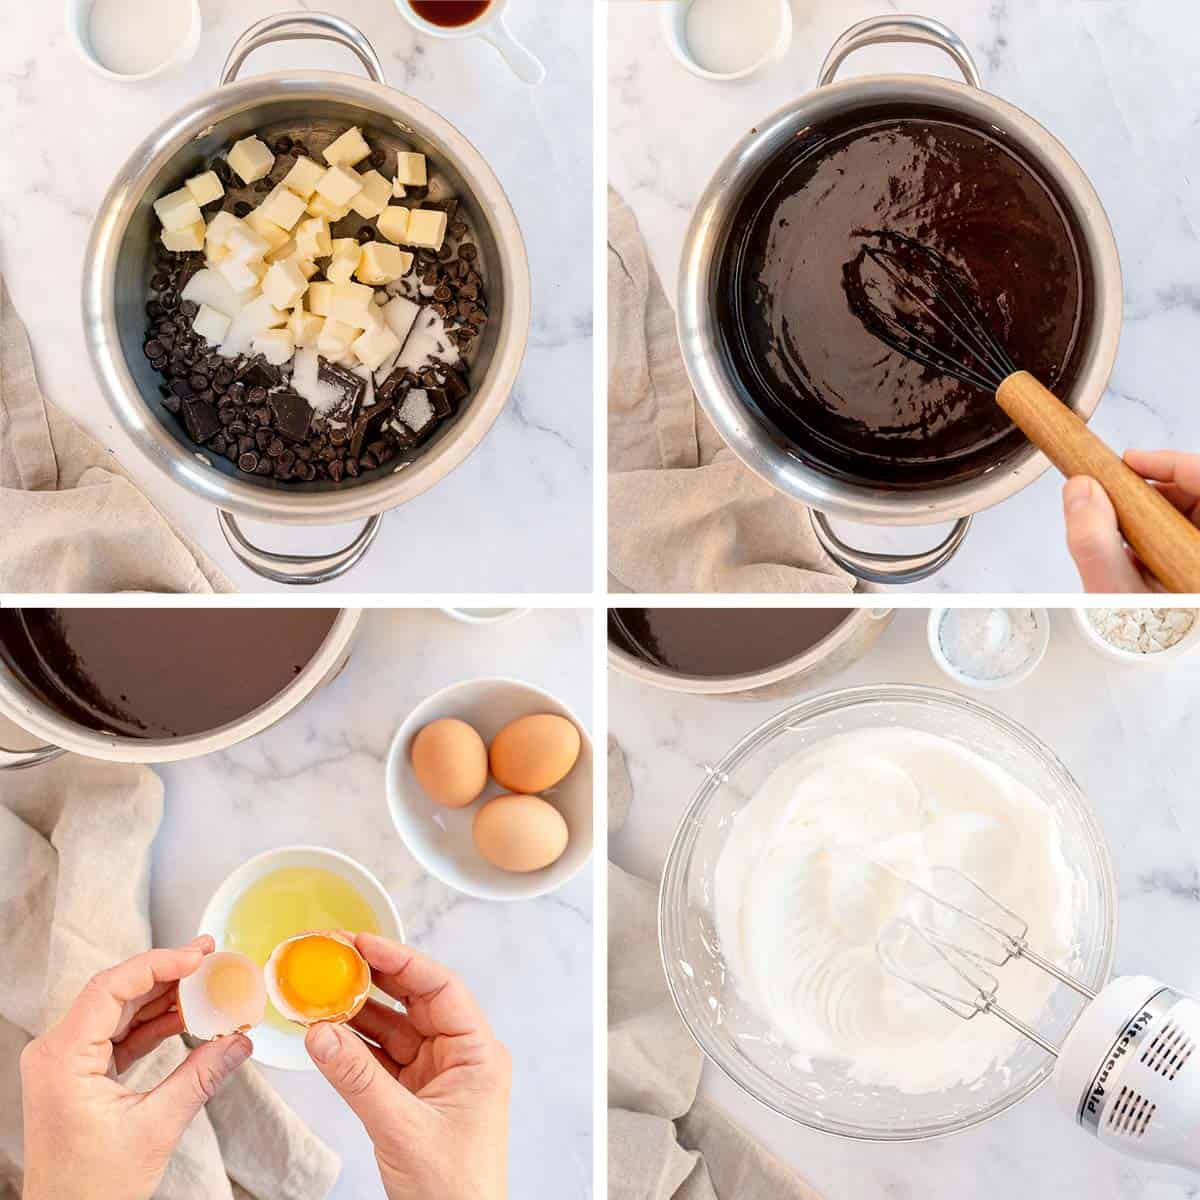 Chocolate and butter melted in a saucepan and egg whites beaten in a mixing bowl.